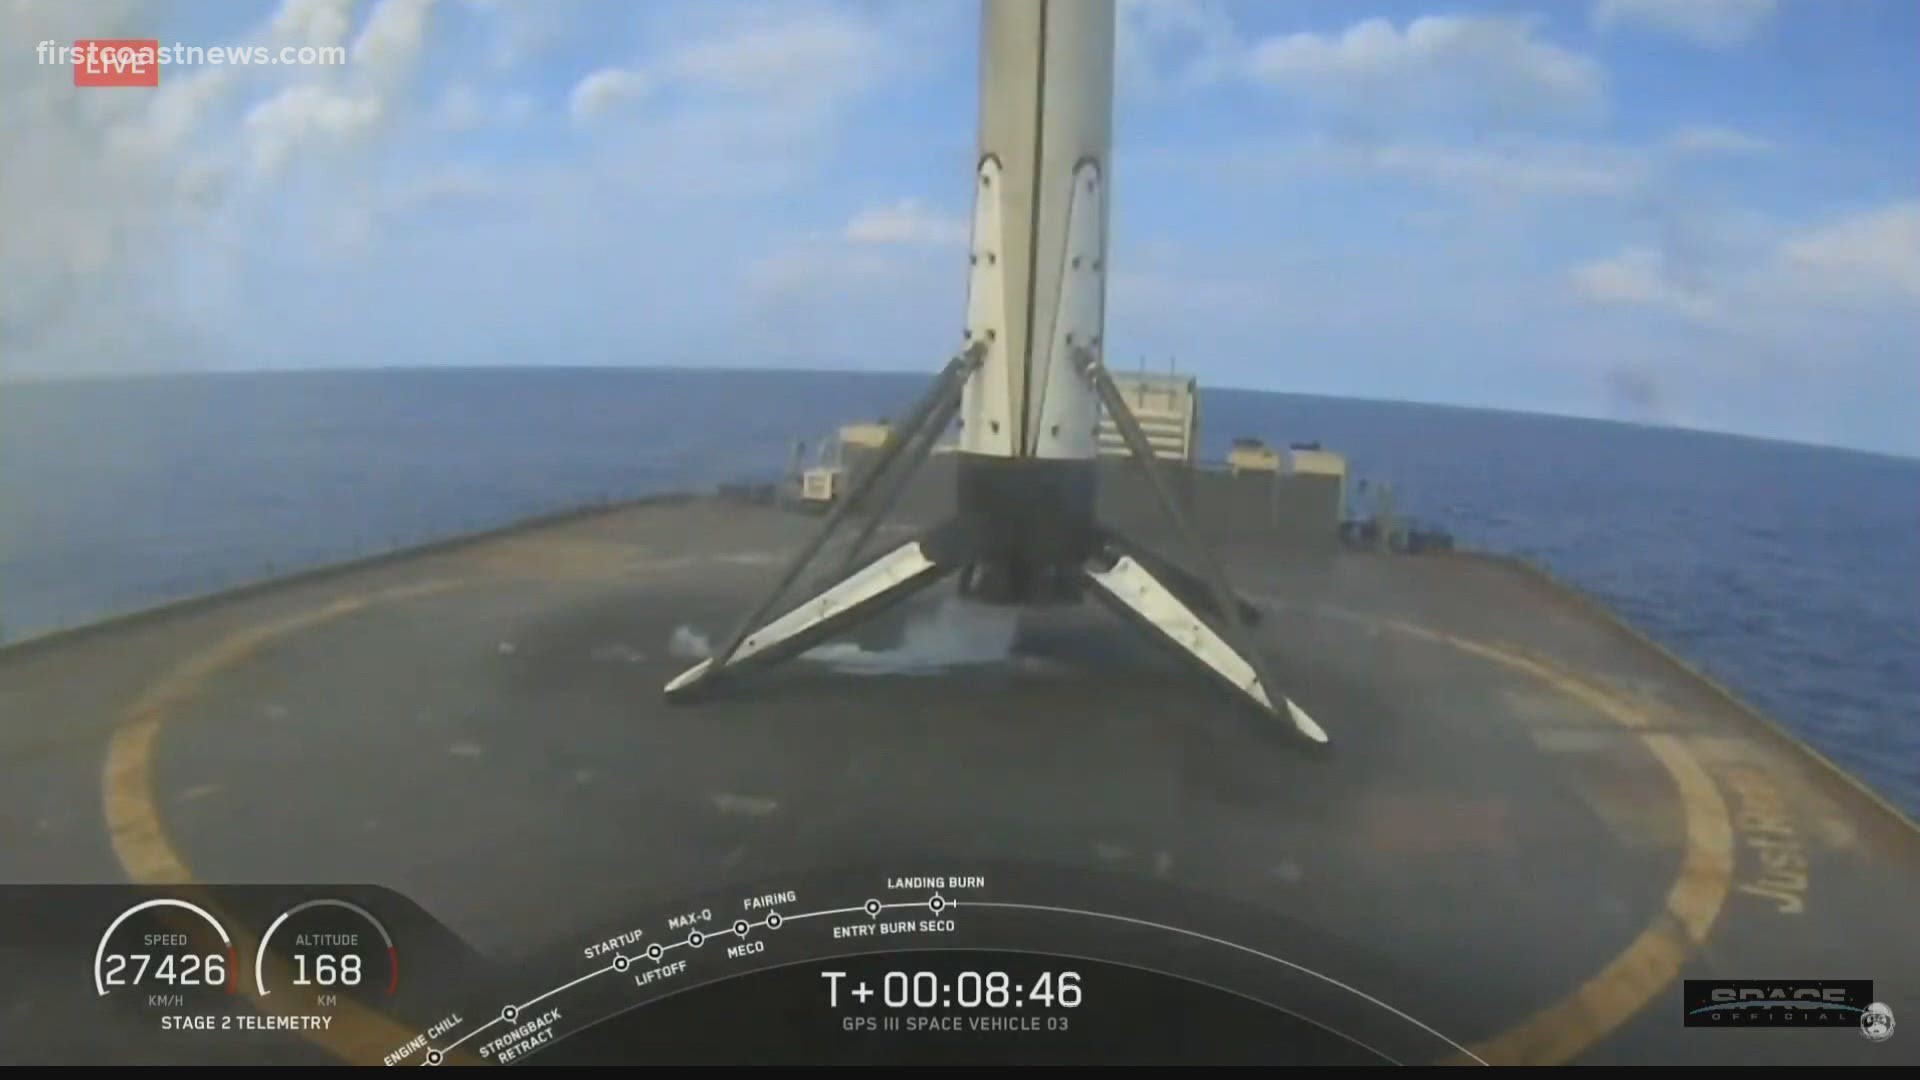 The Falcon 9 rocket landed on a barge hundreds of miles off the Florida coast.